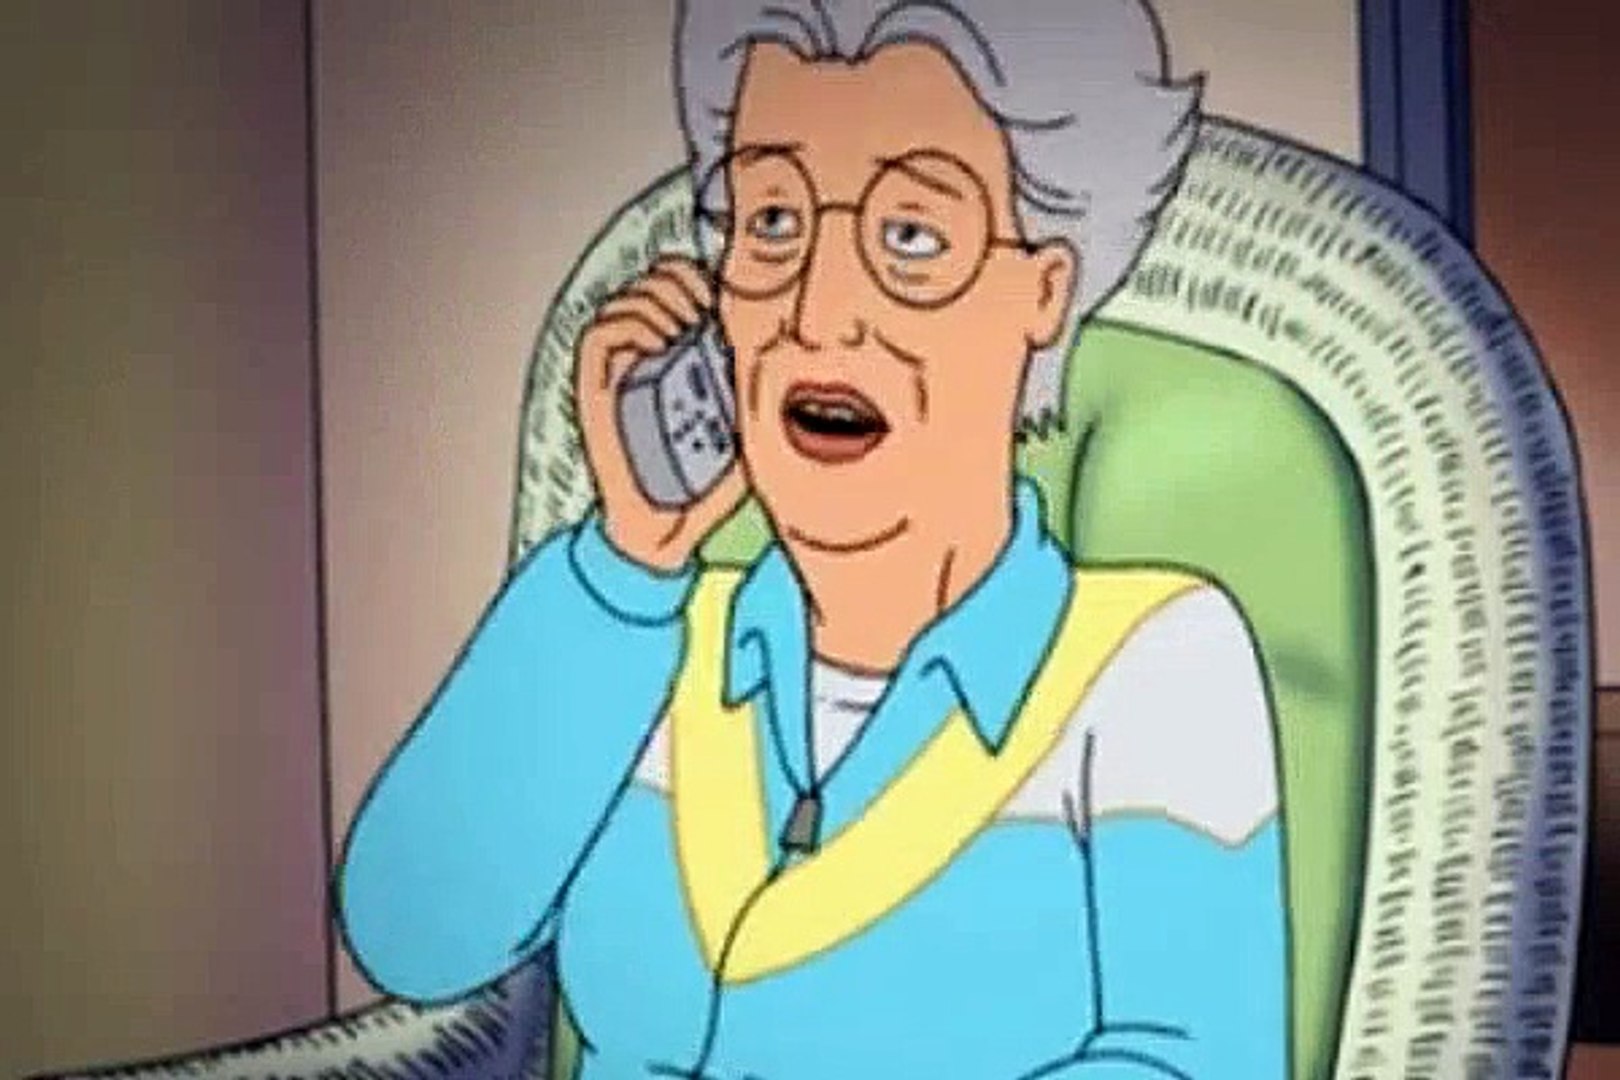 King of the Hill S13 - 21 - The Honeymooners - video Dailymotion